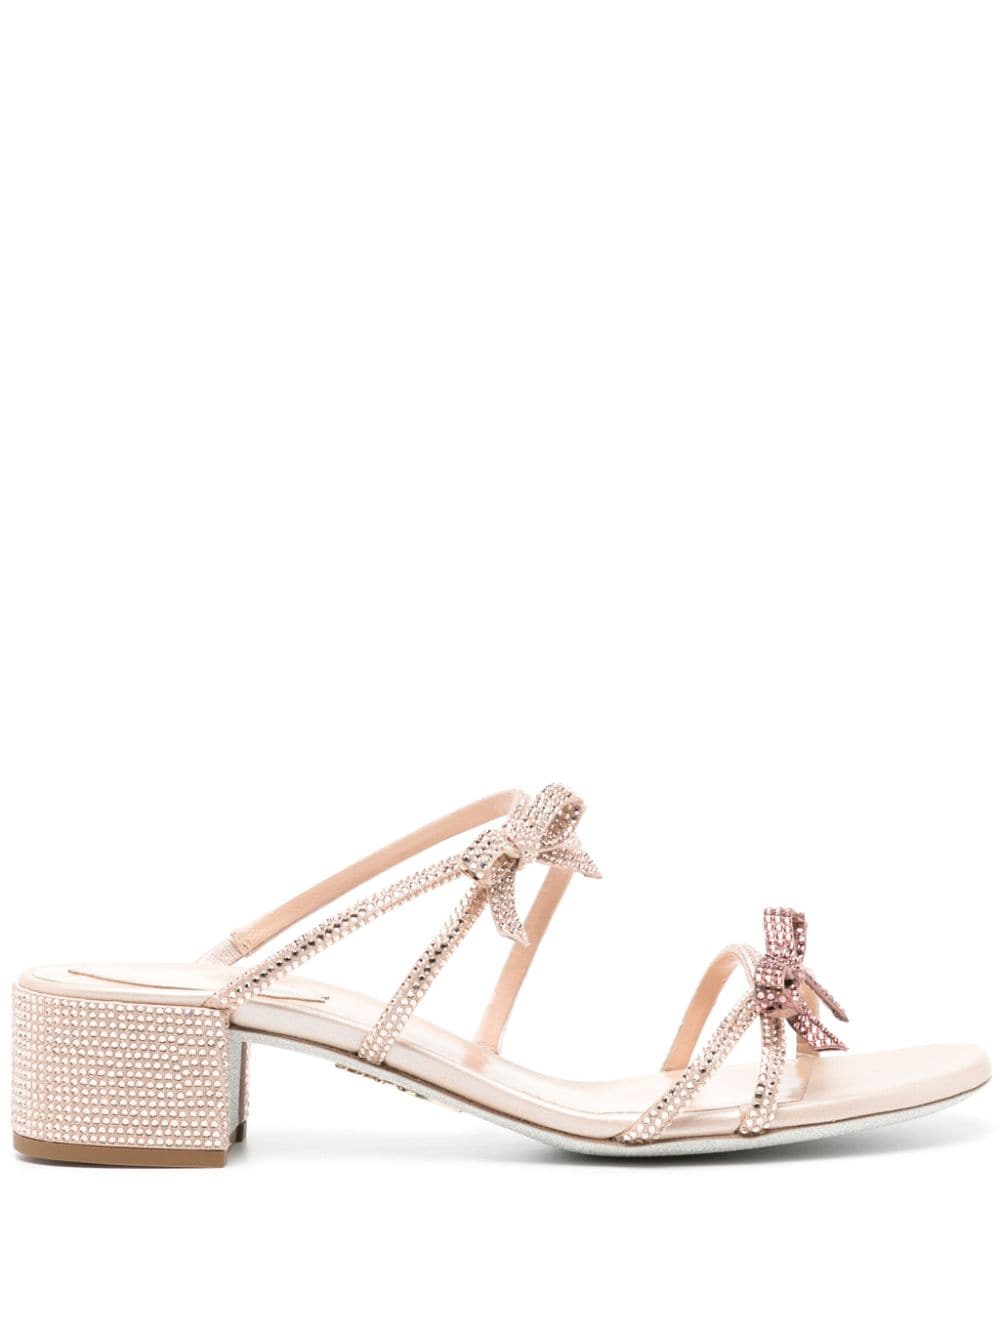 René Caovilla Caterina Slip-on Leather Sandals In Pink